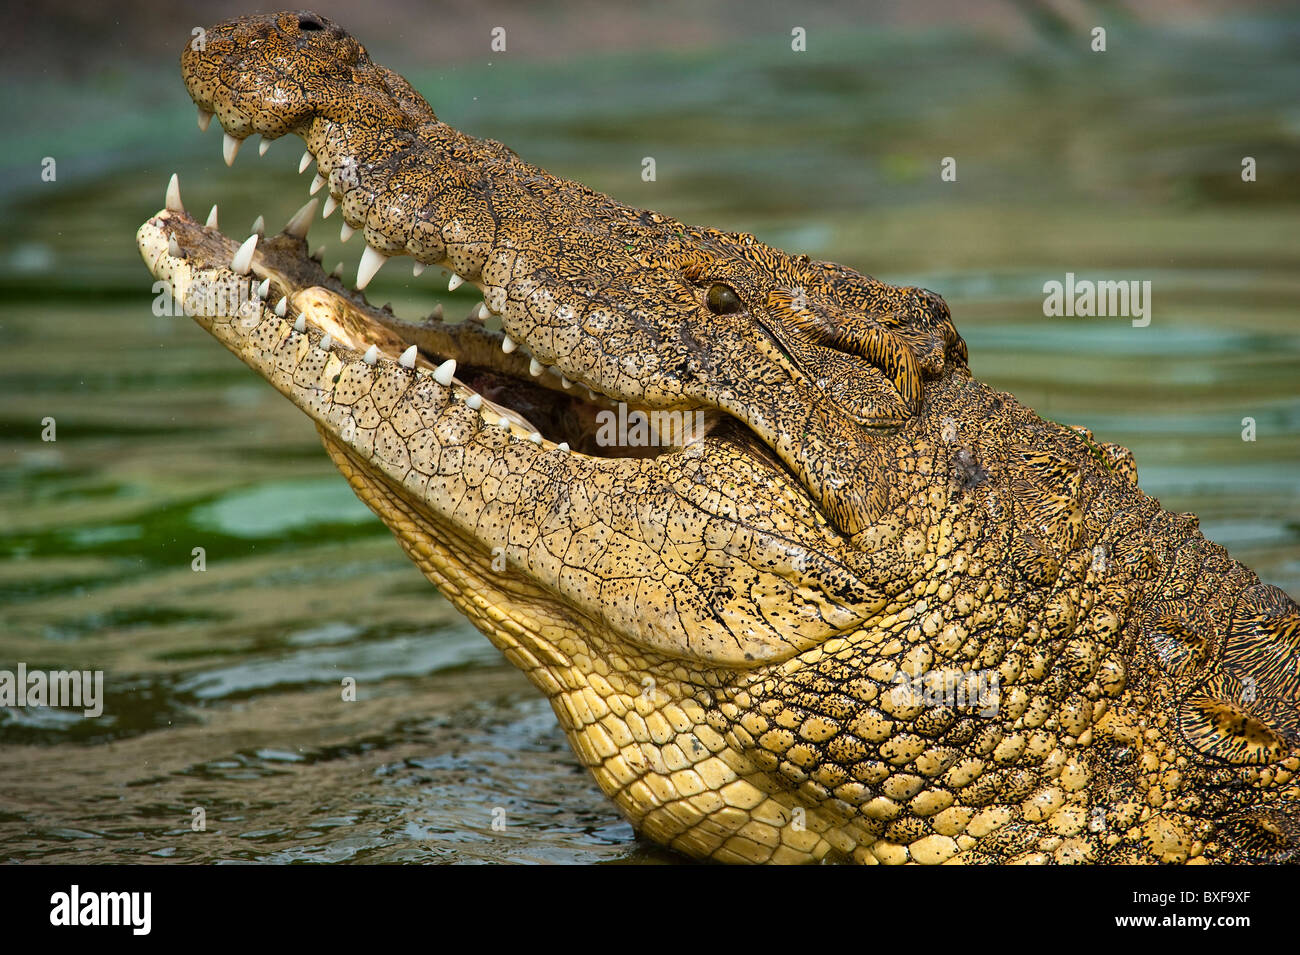 Nile Crocodile (Crocodylus niloticus) looking out from the water. Stock Photo